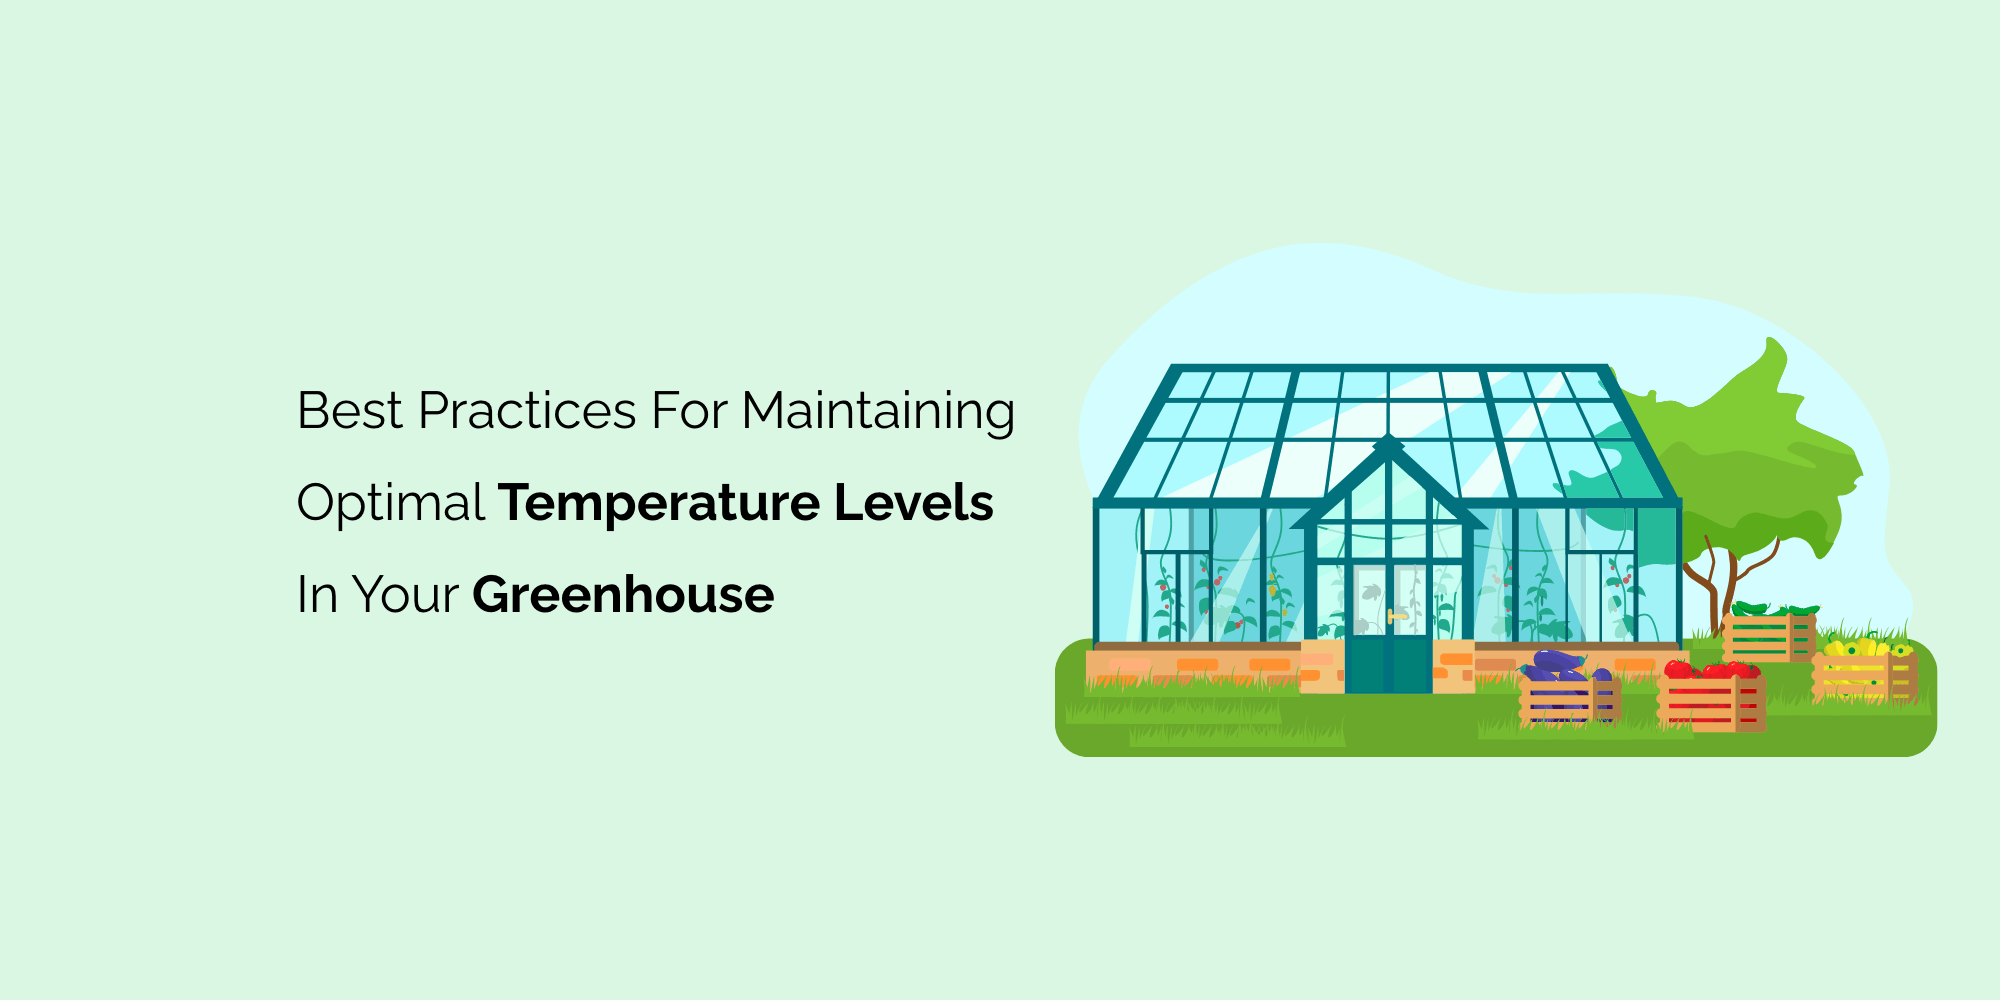 Best Practices for Maintaining Optimal Temperature Levels in Your Greenhouse